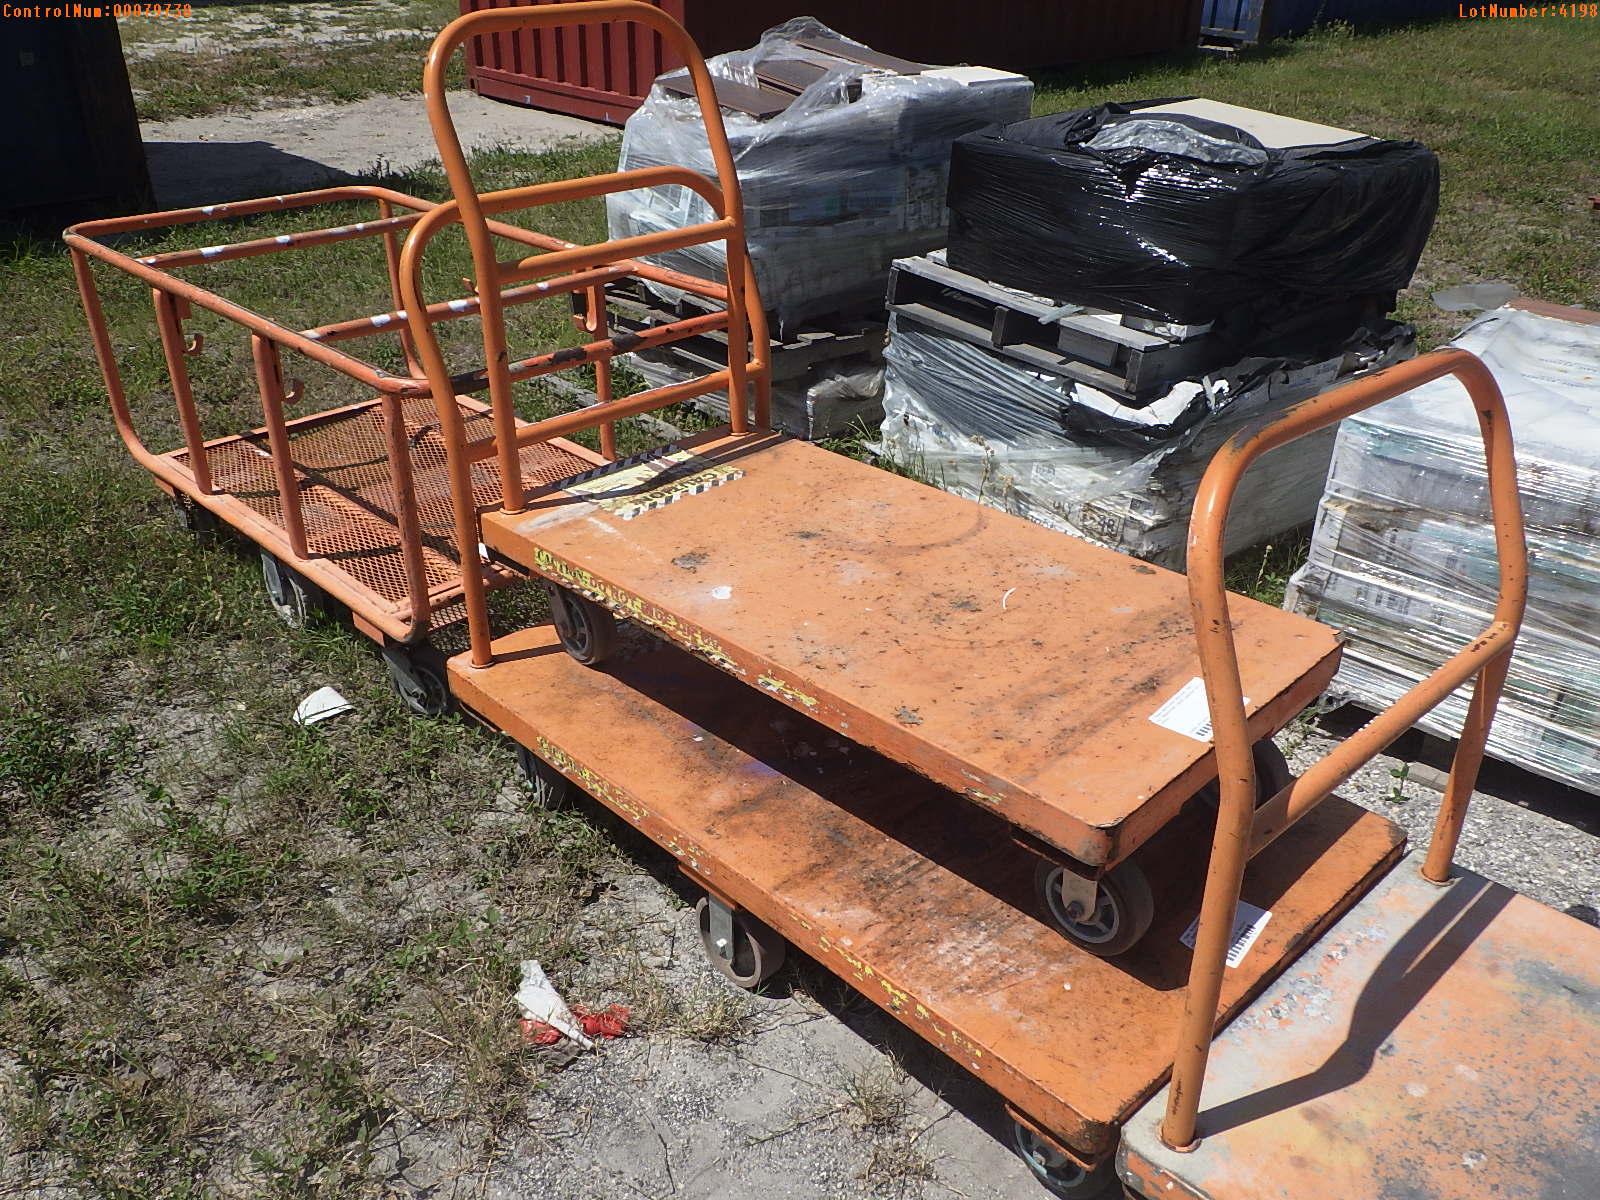 5-04198 (Equip.-Specialized)  Seller:Private/Dealer (6) WAREHOUSE CARTS